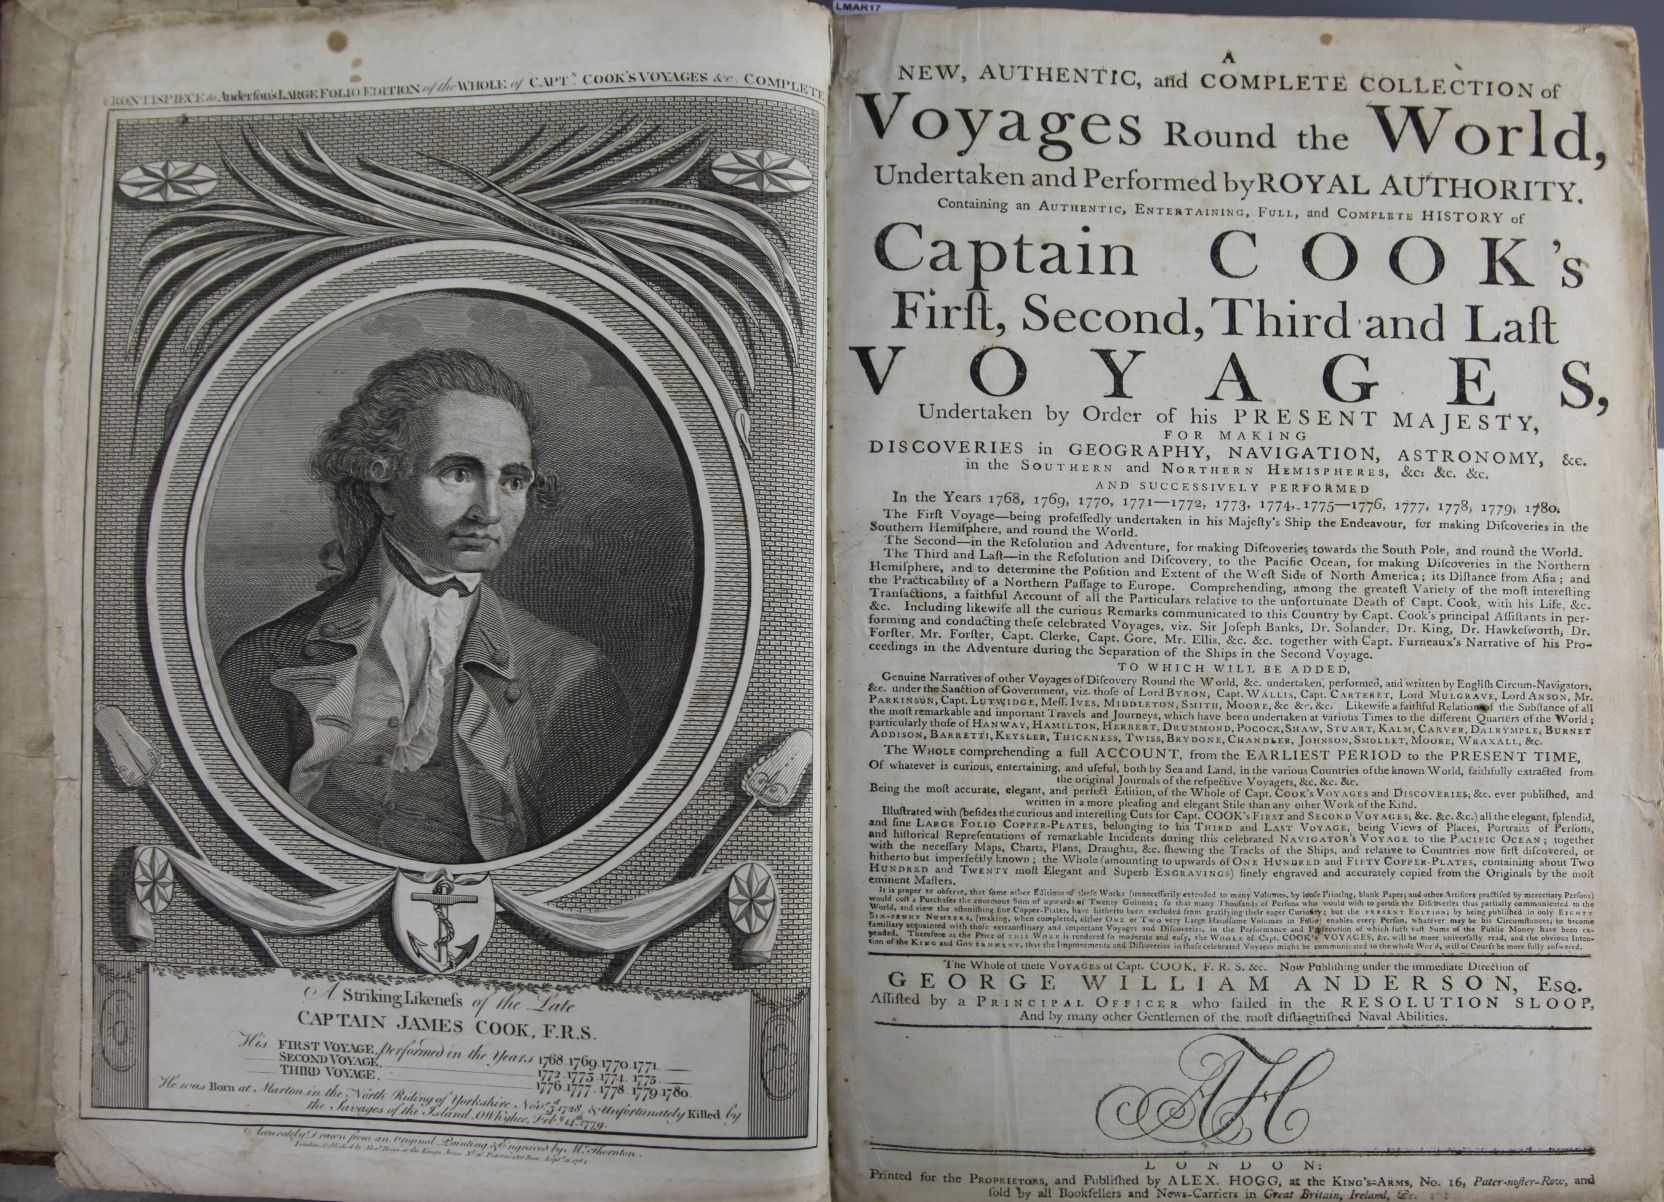 Anderson, George William - A New, Authentic and Complete Collection of Voyages around the World,